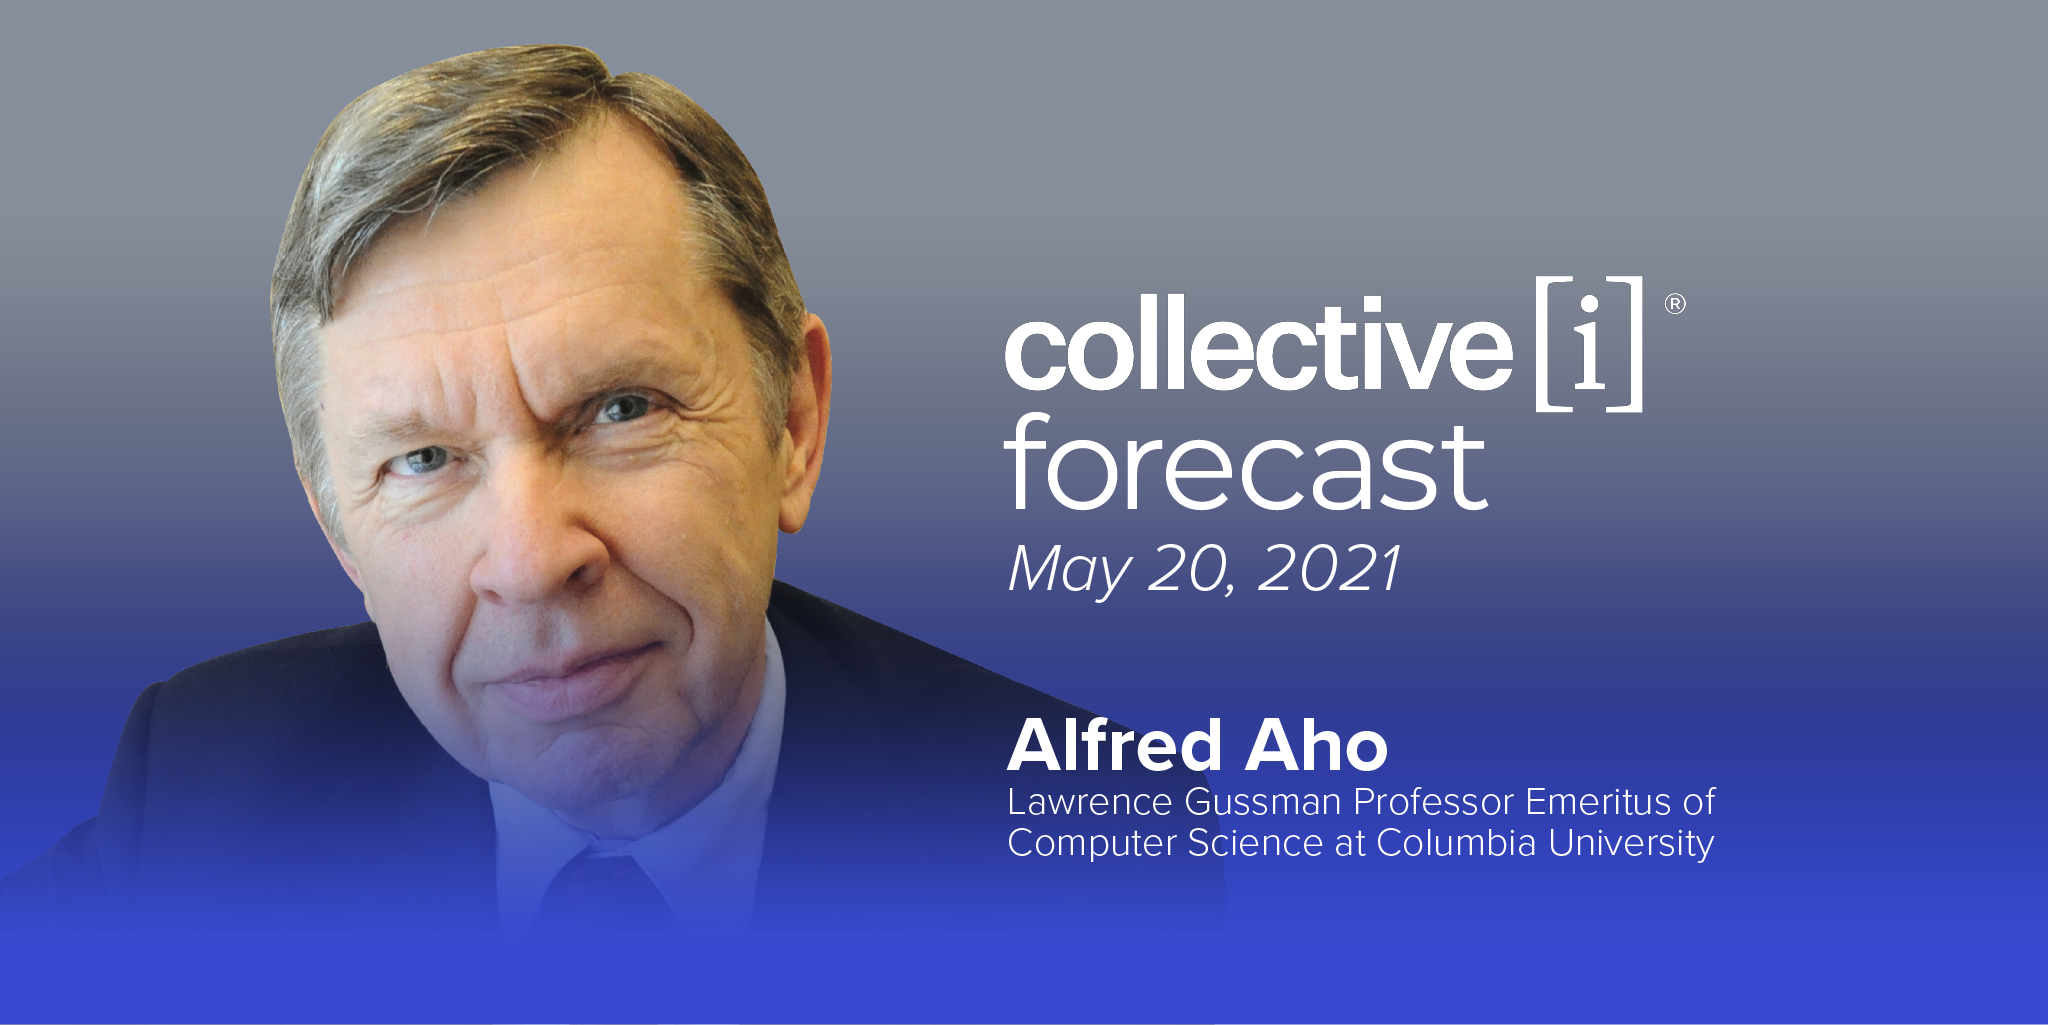 2020 ACM A.M.Turing Award Winner, Alfred Aho to be featured in Collective[i] Forecast speaker series